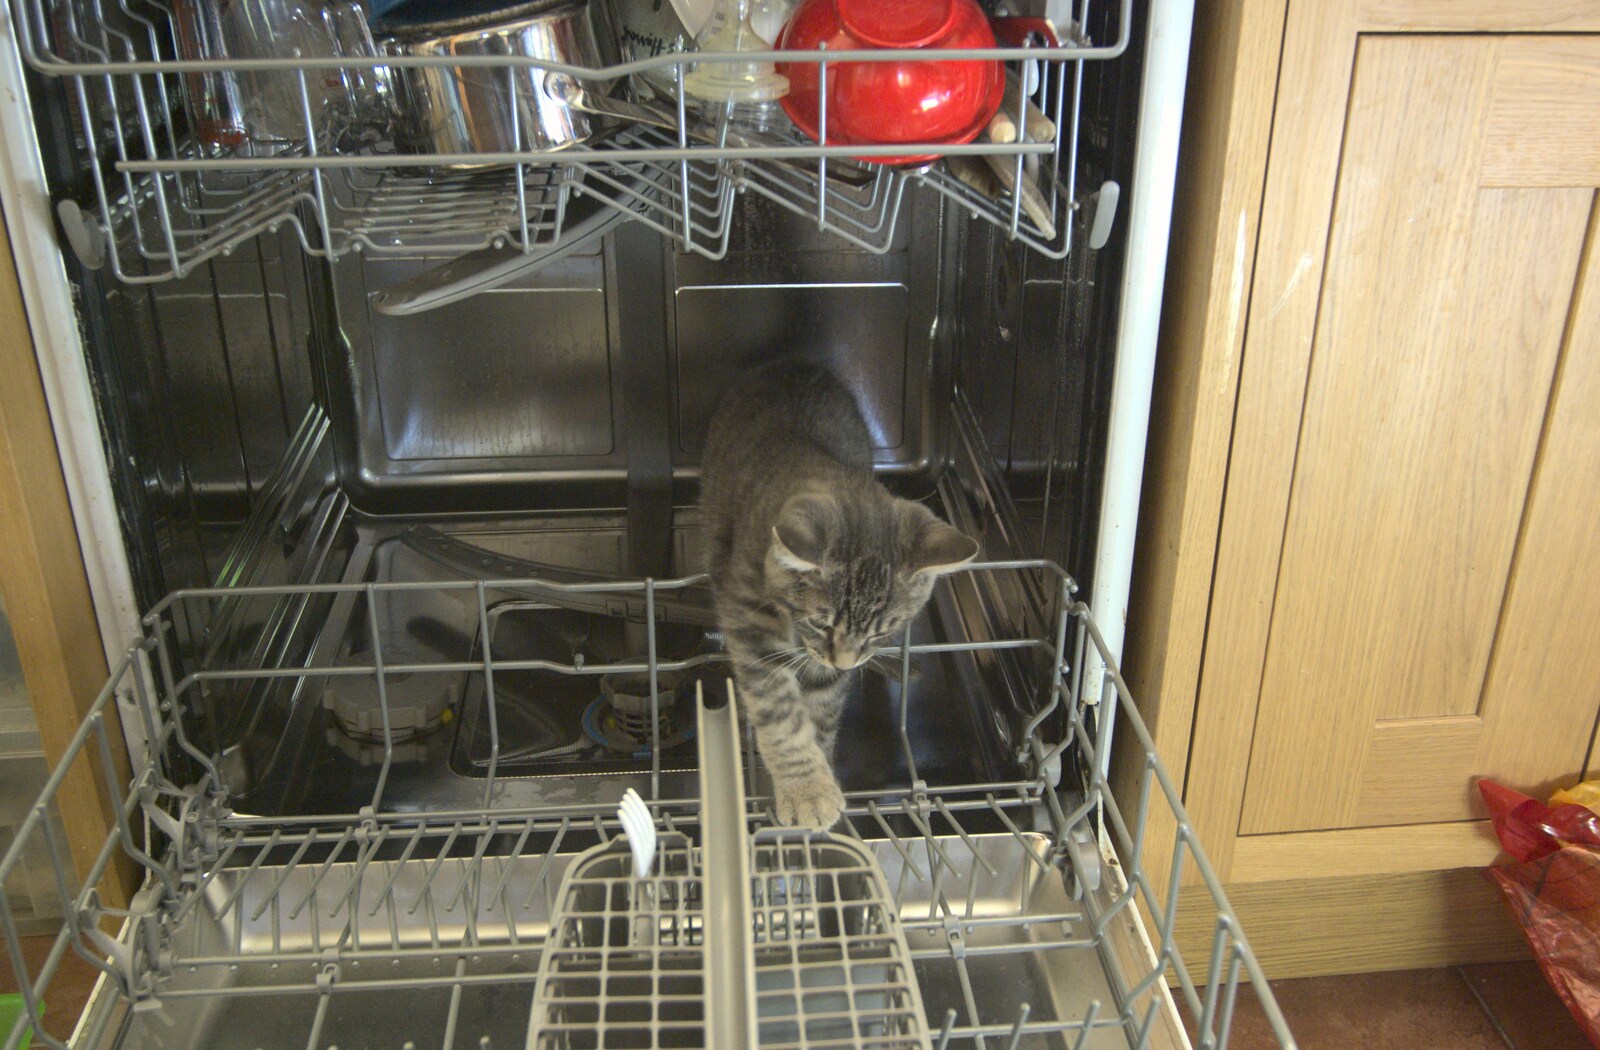 Boris finishes exporing the dish washer from The BBs at Stradbroke, and Wavy's Cabin, Thrandeston, Suffolk - 22nd August 2009